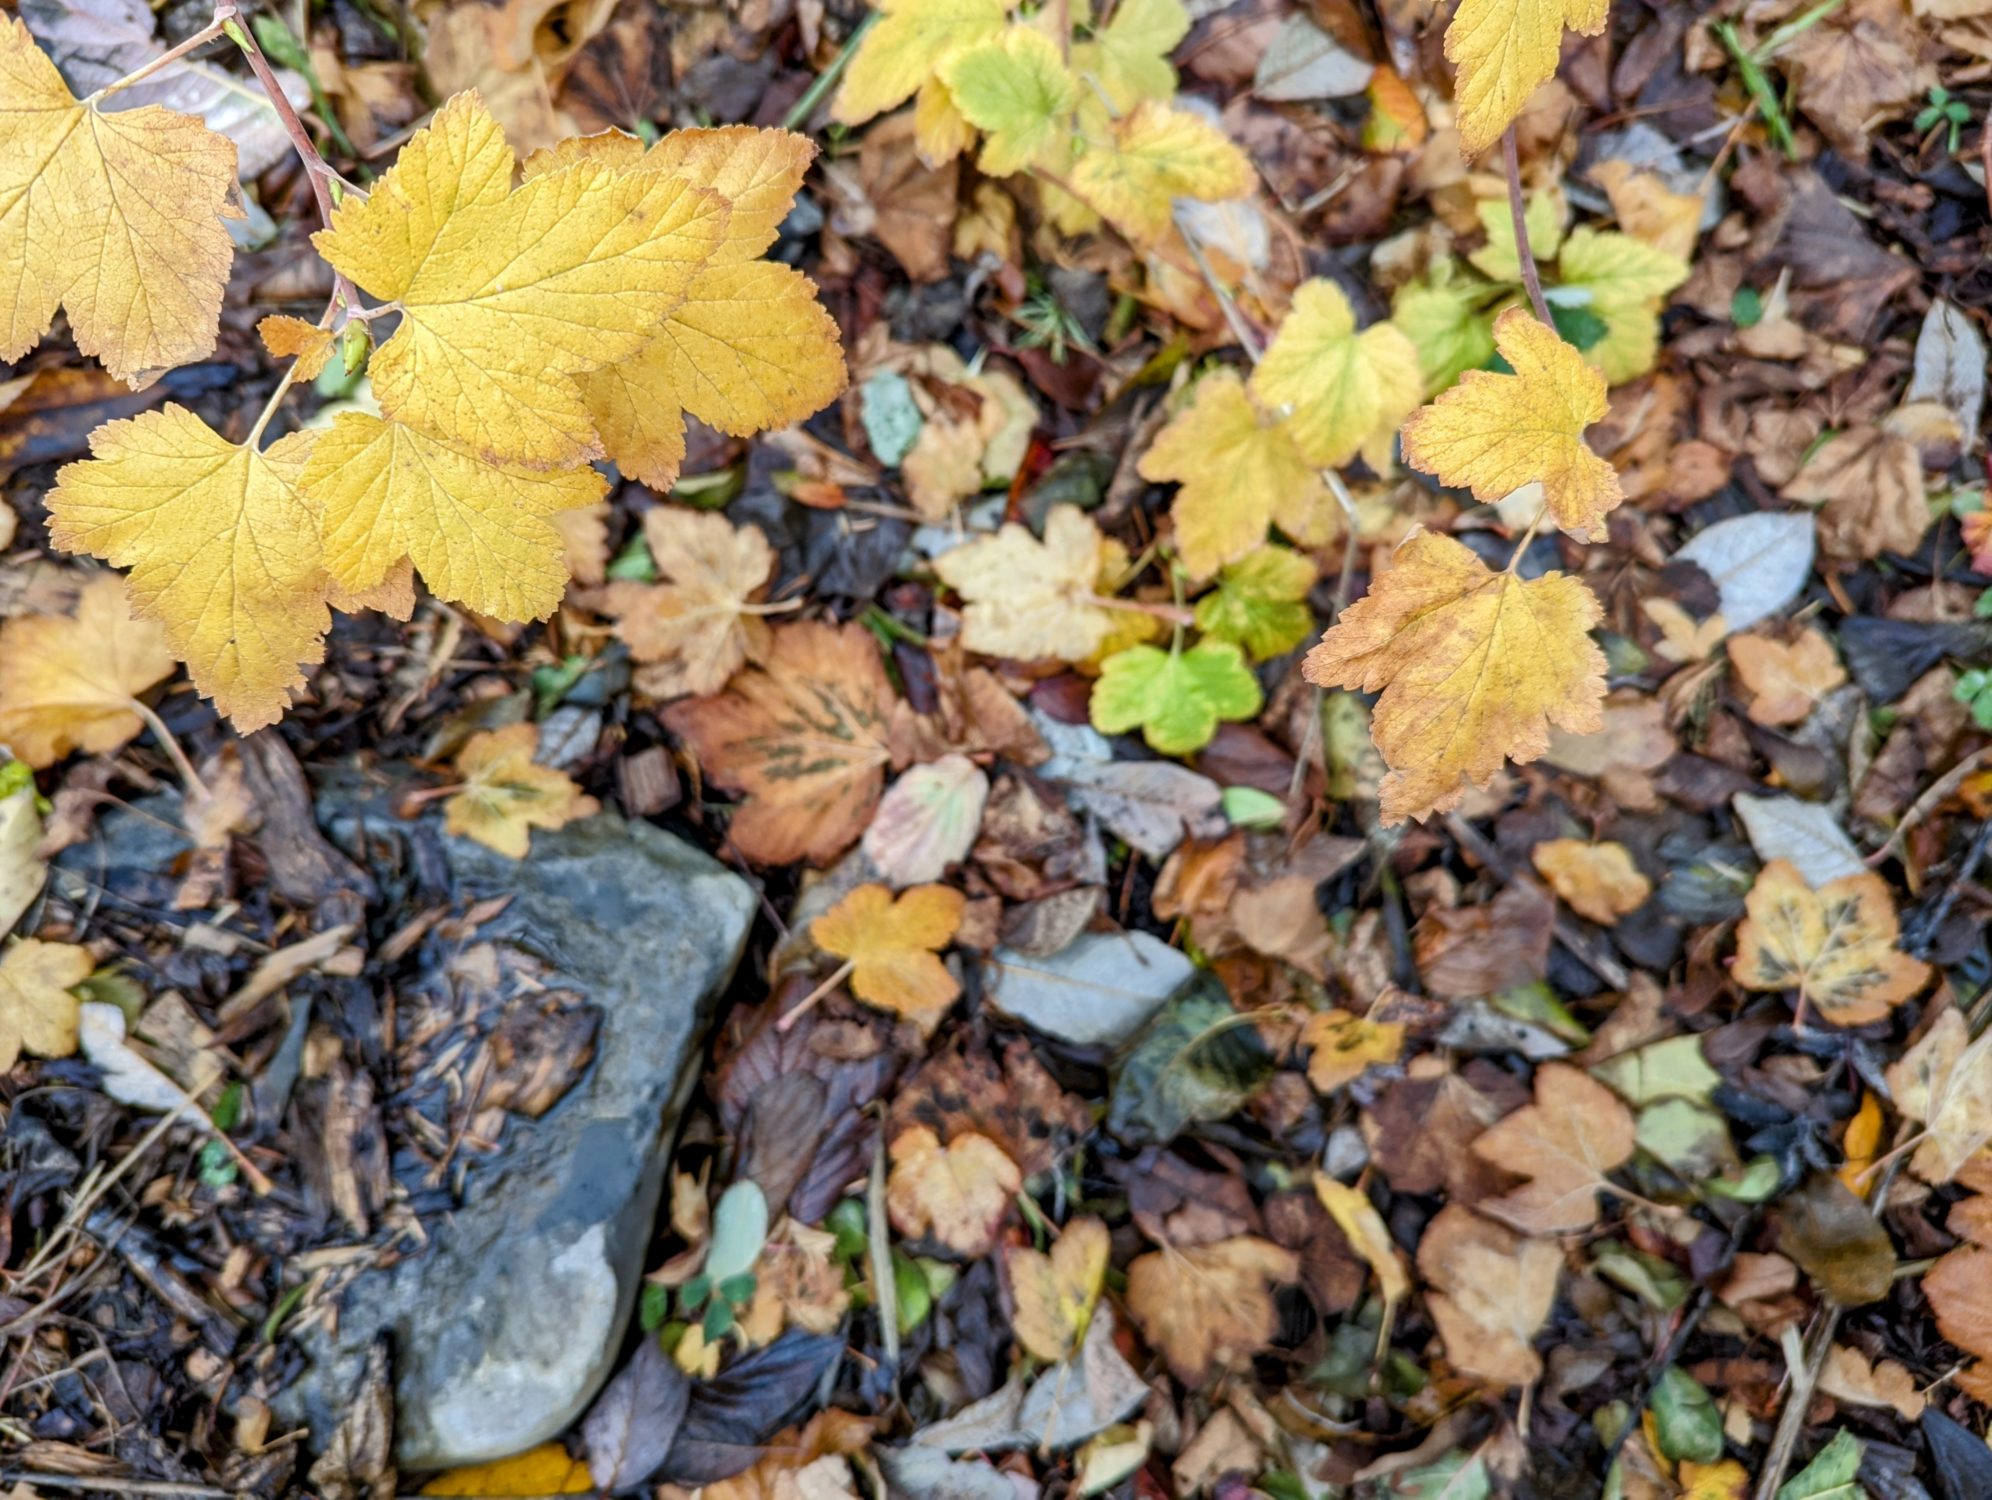 The photo is looking down to the ground through branches with yellow leaves. On the ground below, leaves cover the surface ranging in color from light yellow to brown. A rock is seen jutting out from the fallen leaves, wet from recent rain.